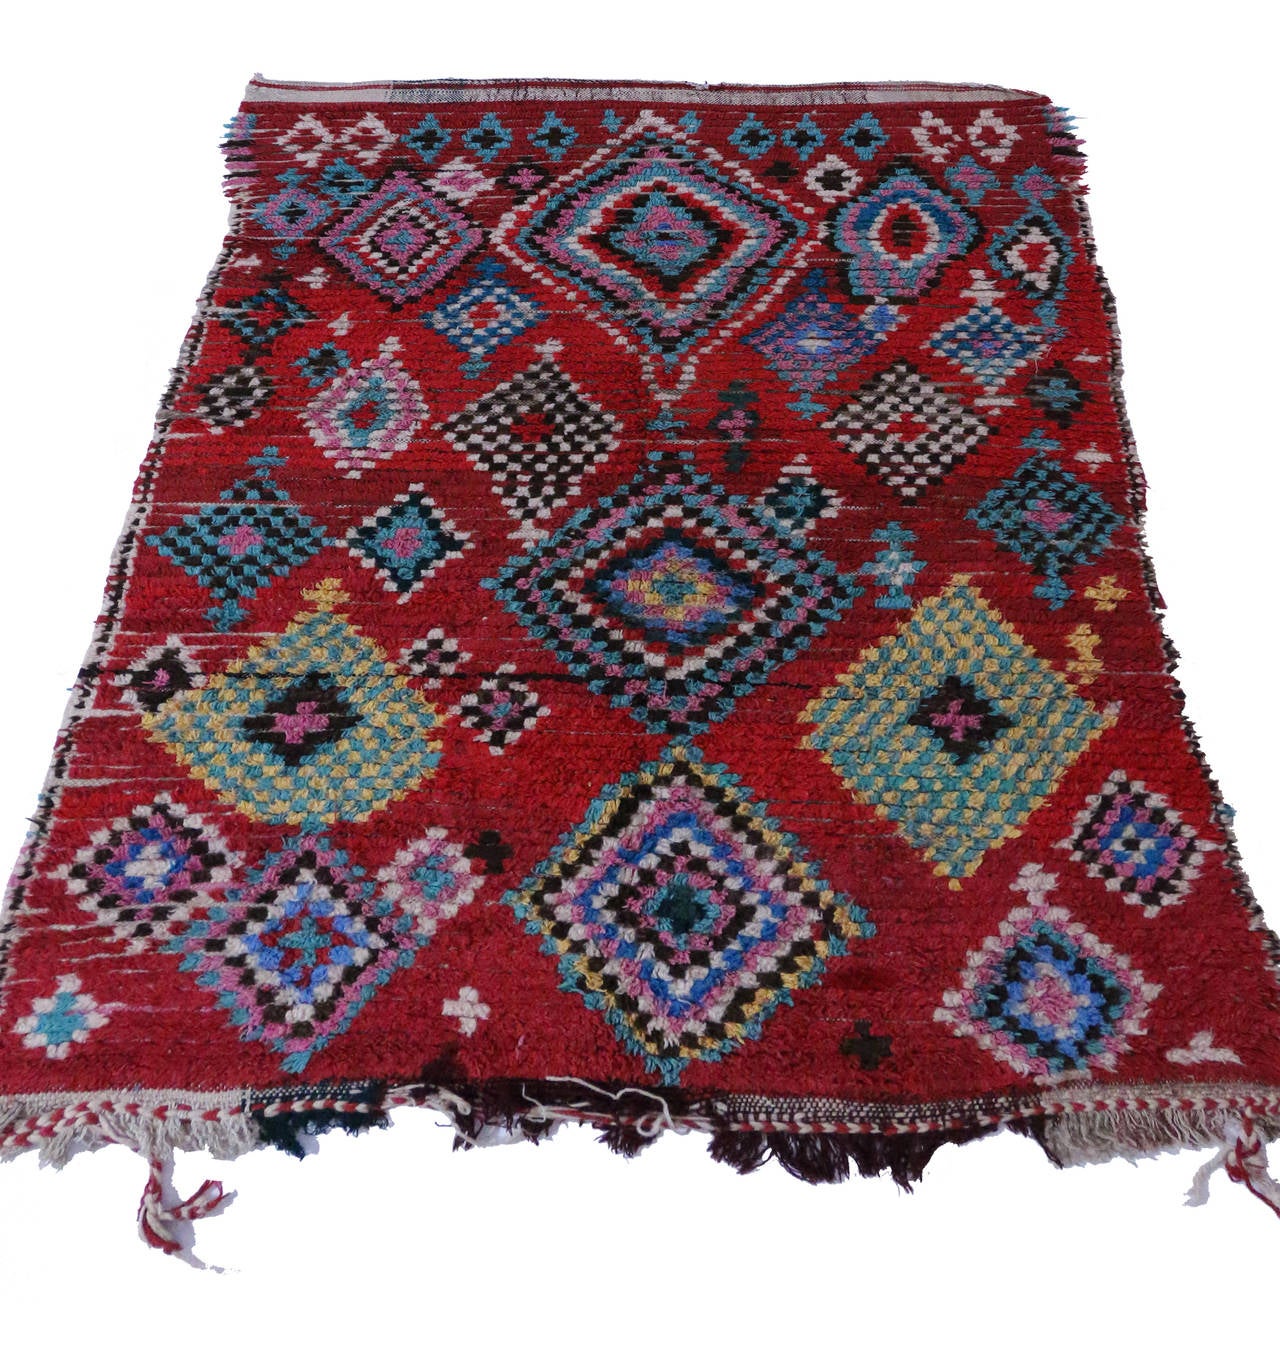 Berber Moroccan Rug with Modern Tribal Design and Boho Chic Style 1